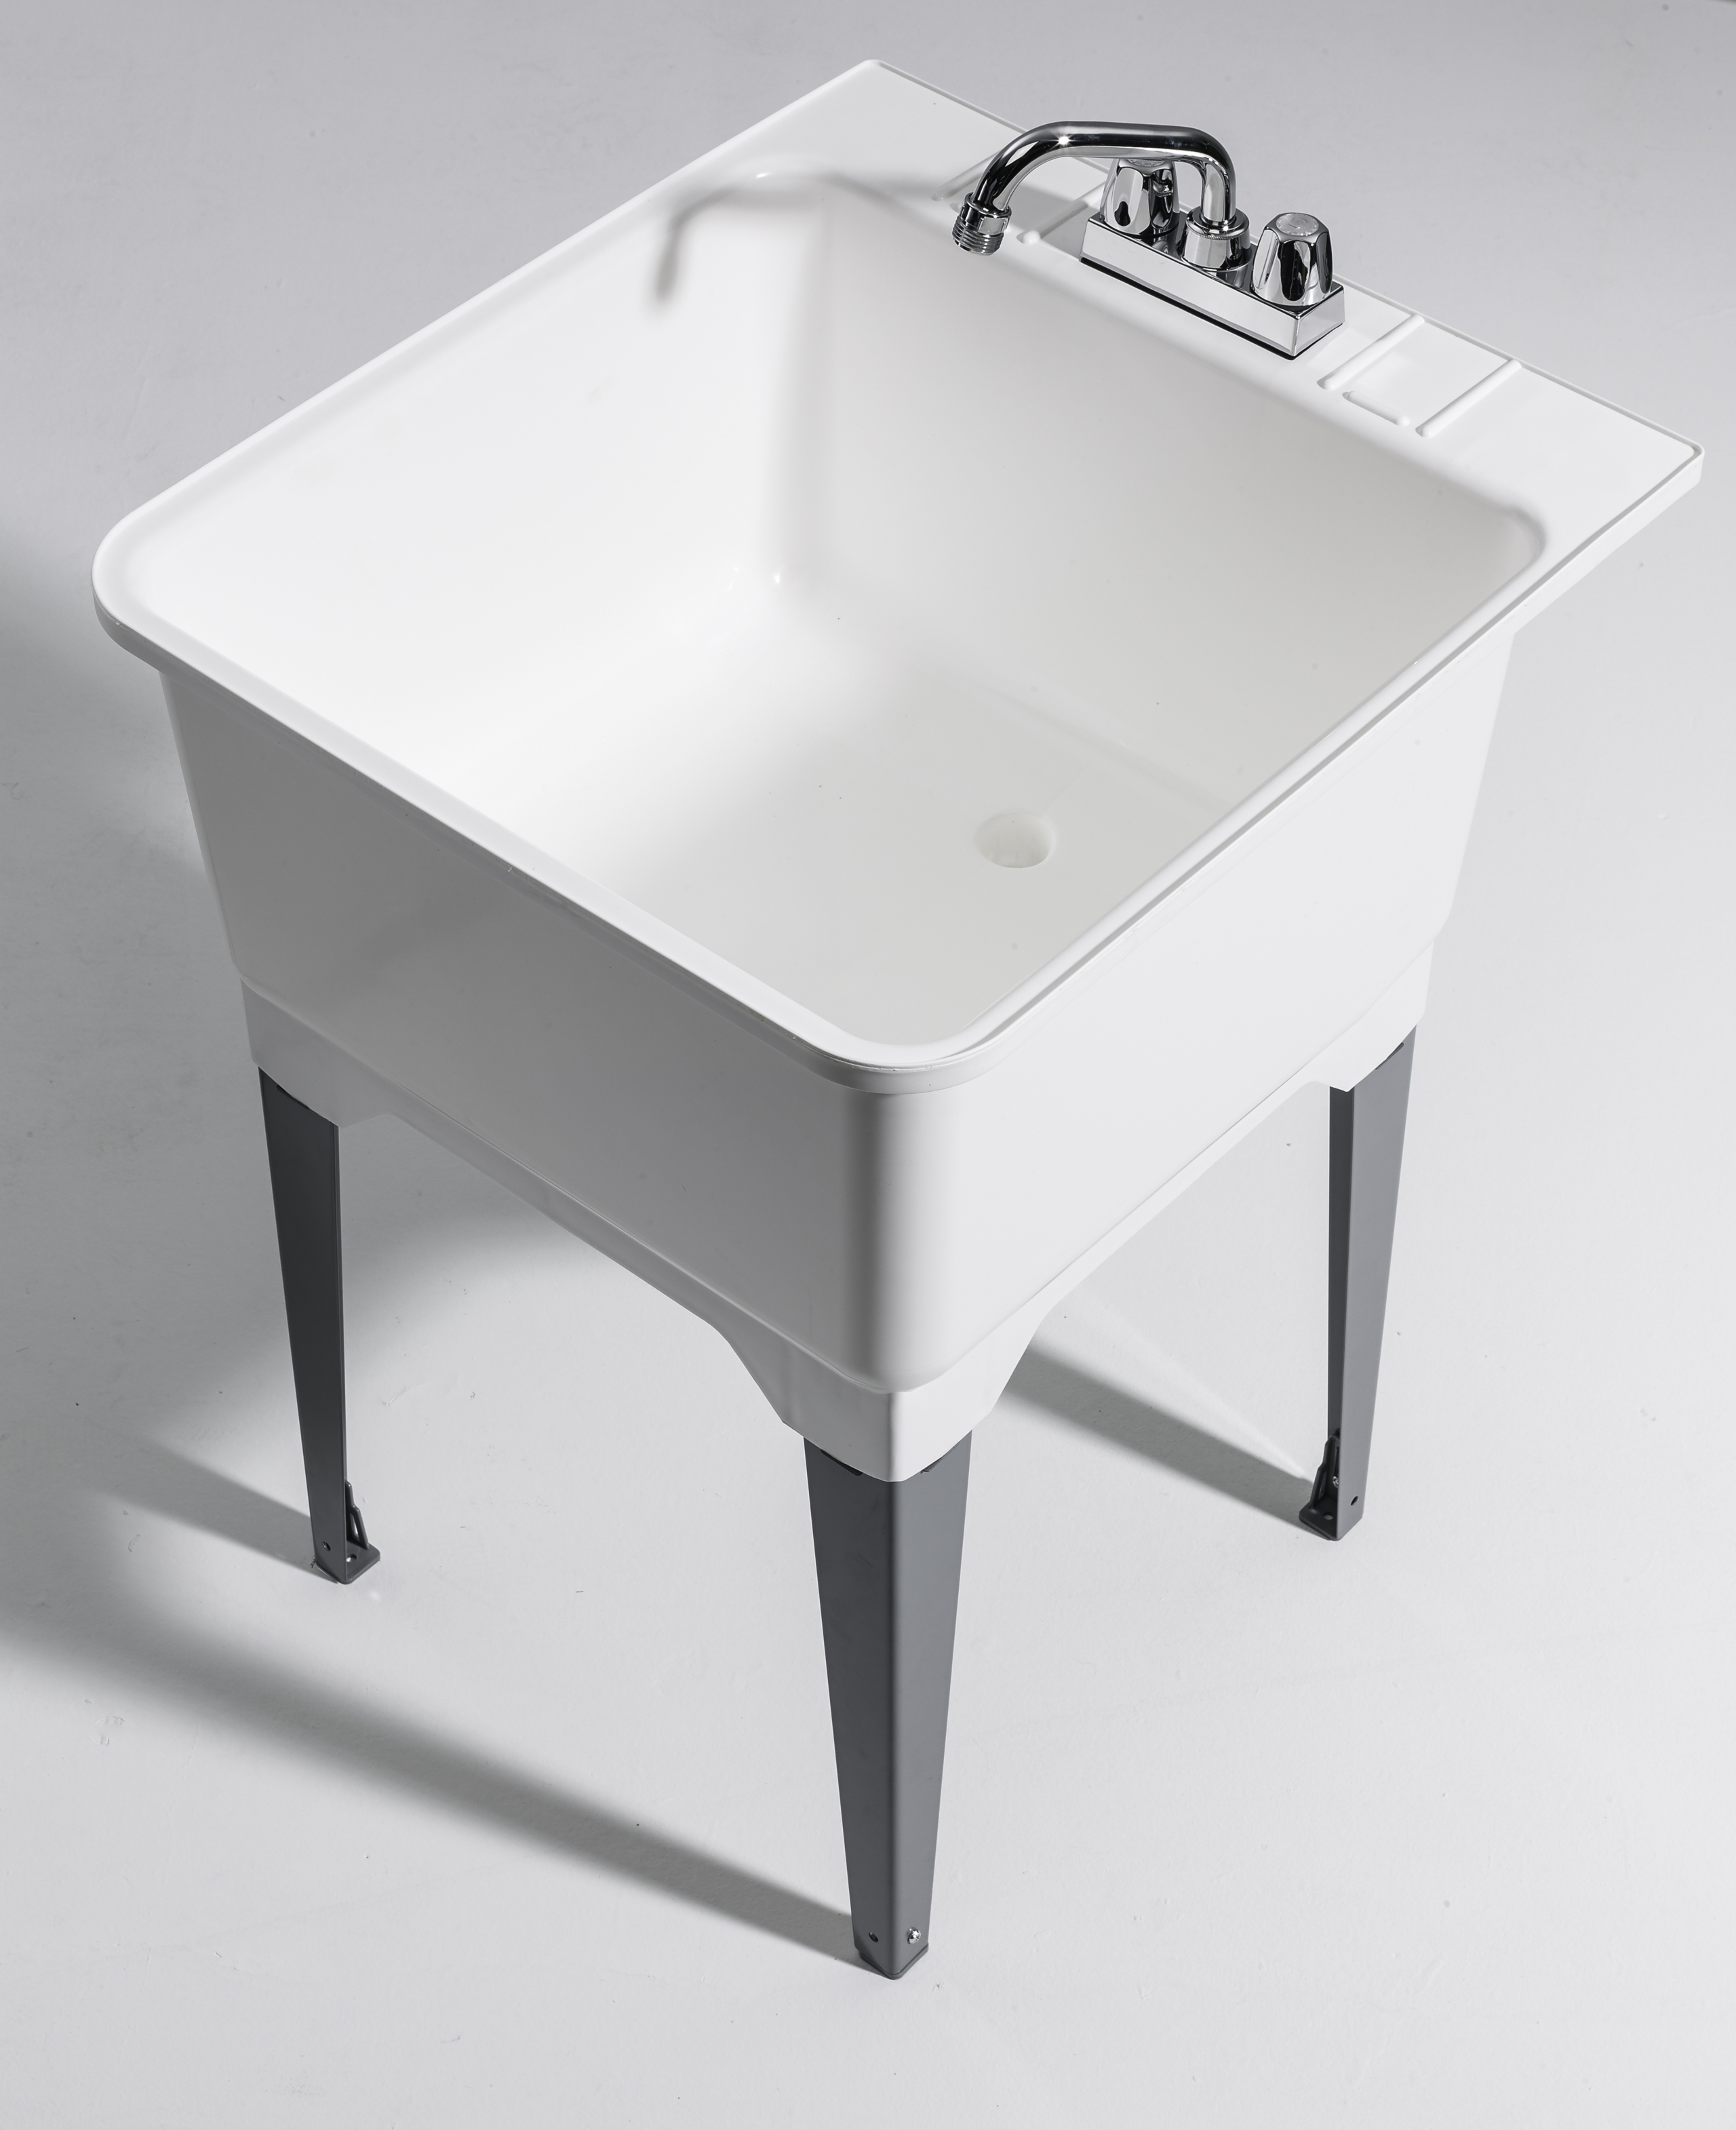 https://visualhunt.com/photos/12/22-75-x-25-25-freestanding-laundry-sink-with-faucet.jpg